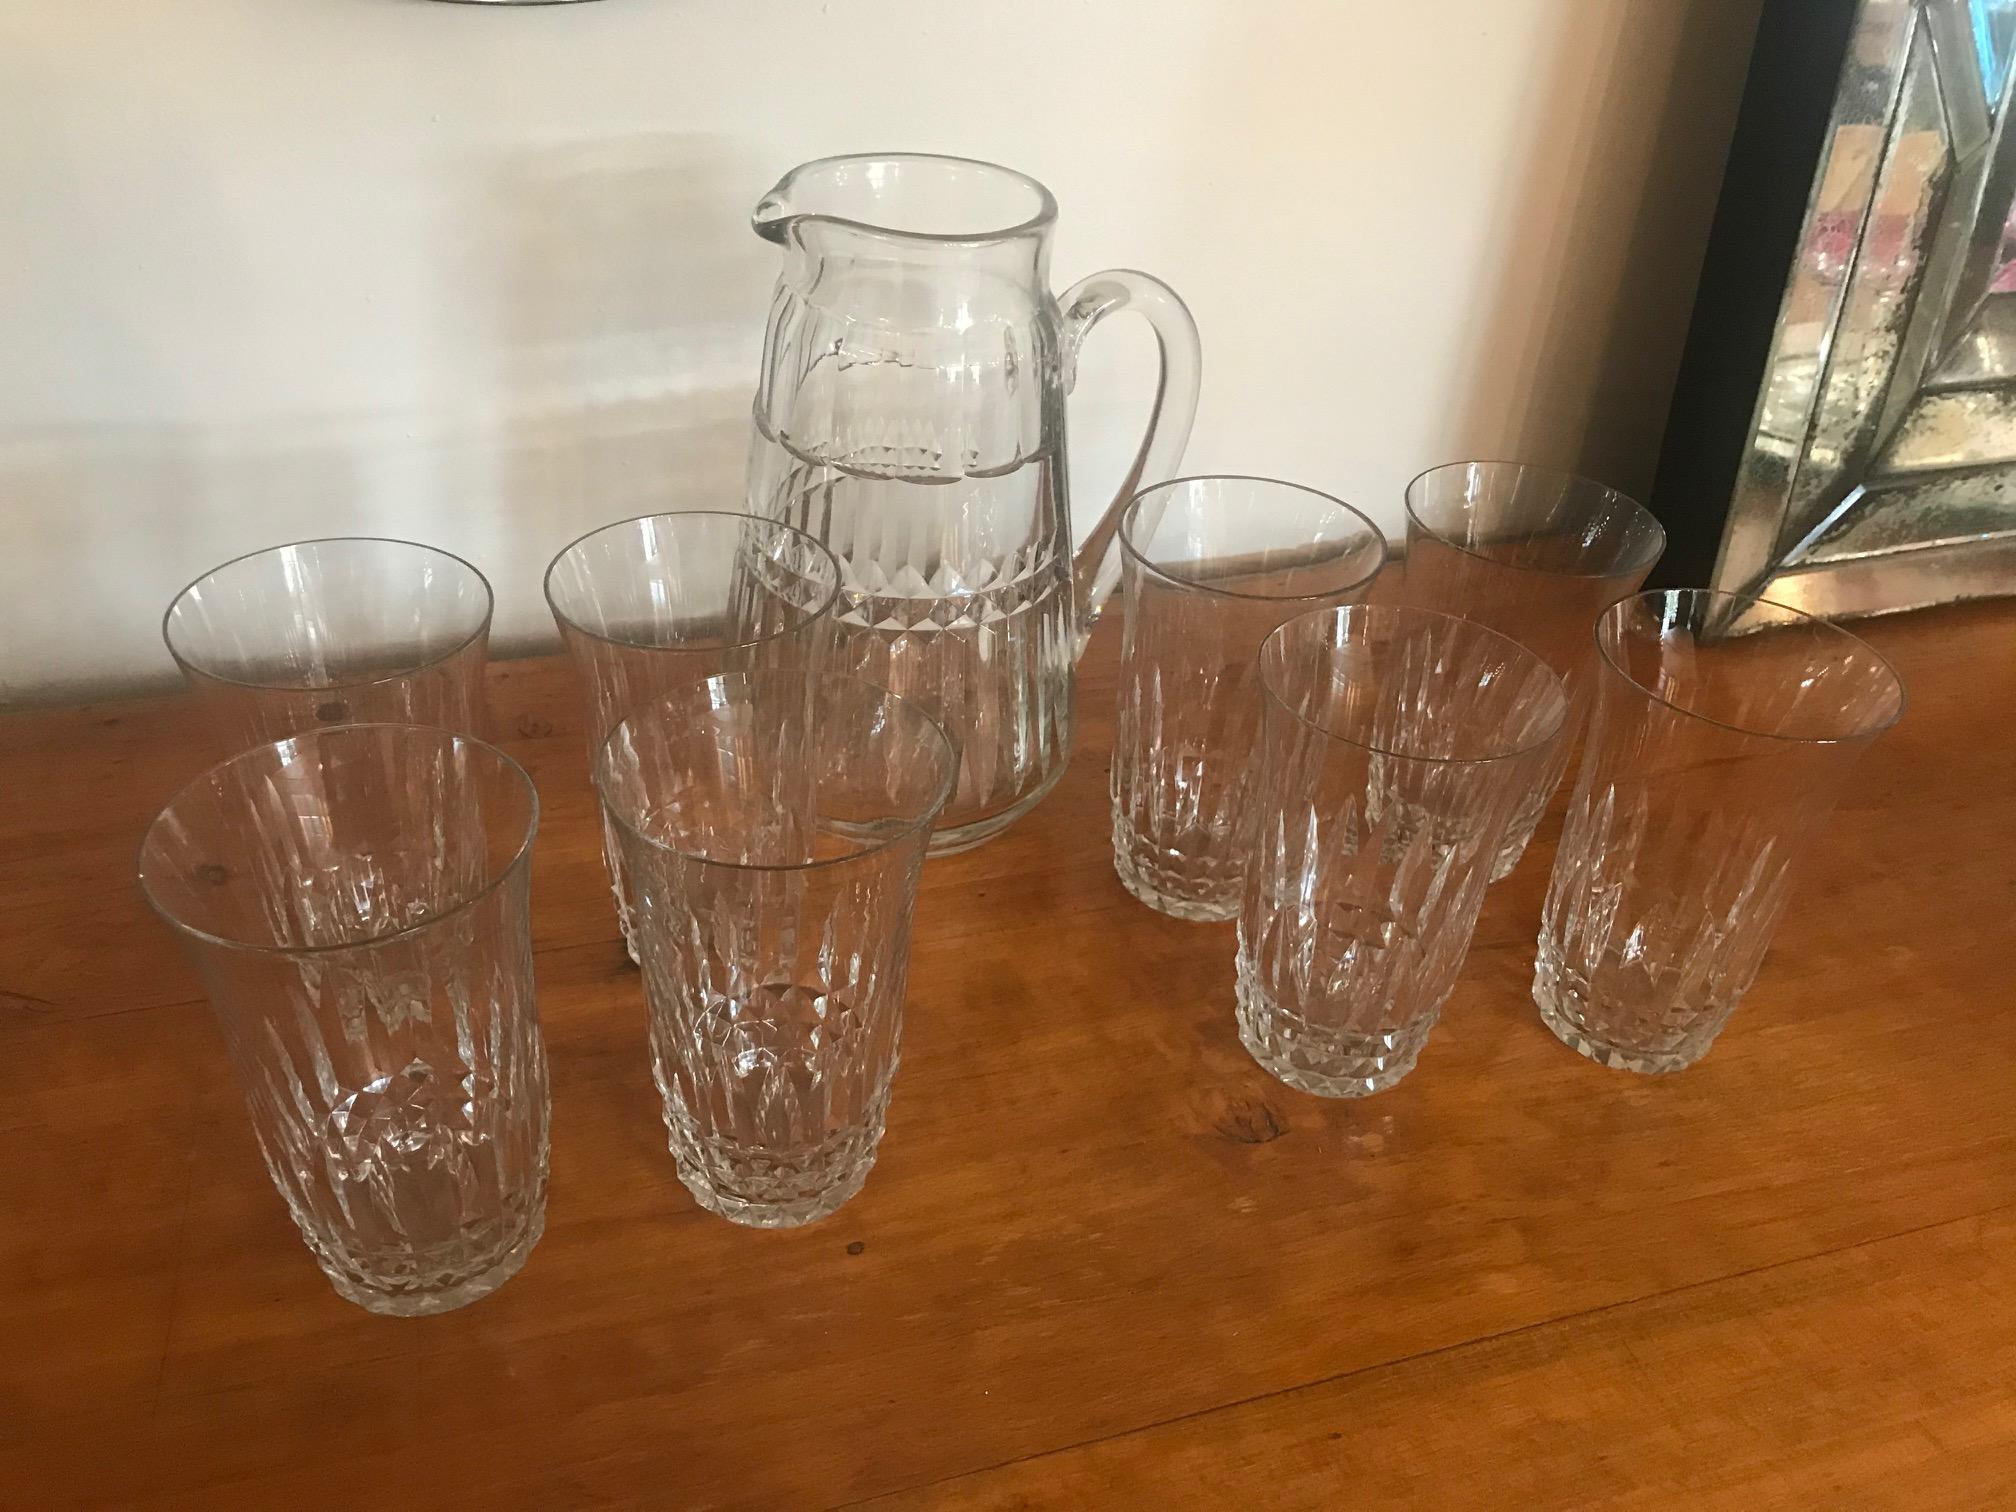 Very nice 20th century French crystal Baccarat set of a Carafe and 8 glasses from the 1940s. 
Flare shape of the glasses and nice engraved crystal work.
The carafe is also well designed. Very good condition.
 